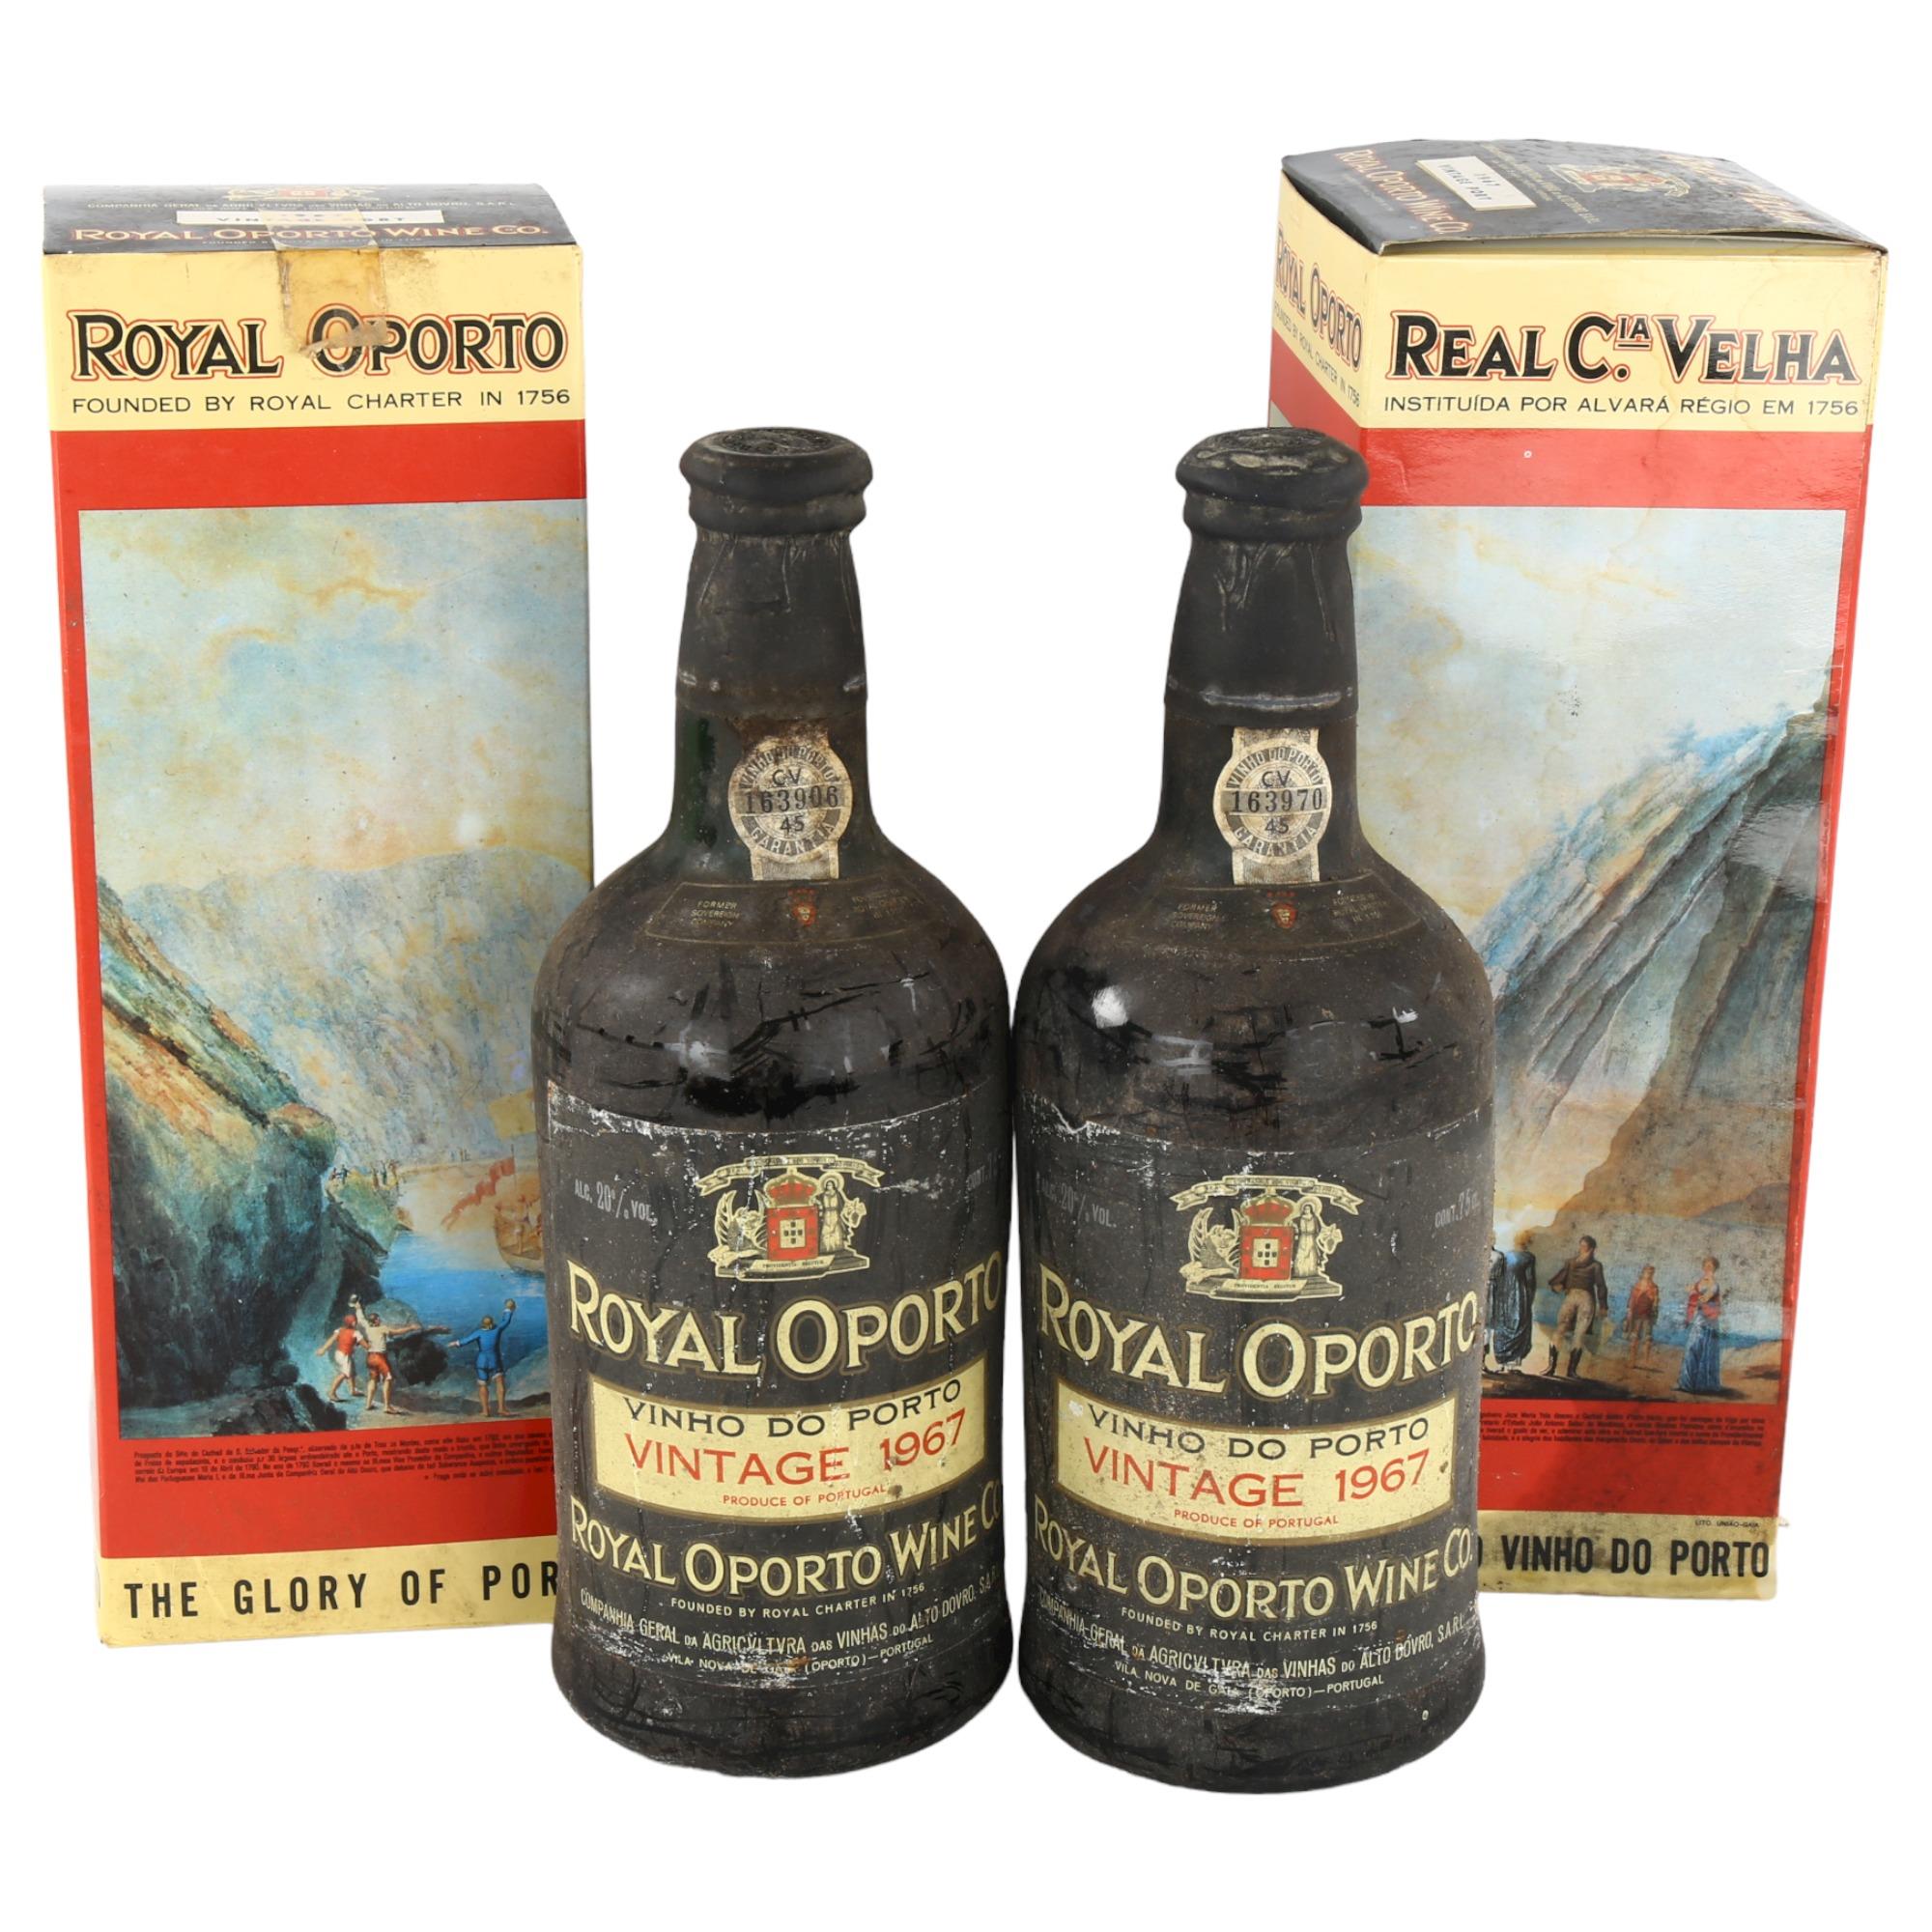 4 bottles of vintage port, 1967 Royal Oporto, 2 in original box Capsules intact, levels high